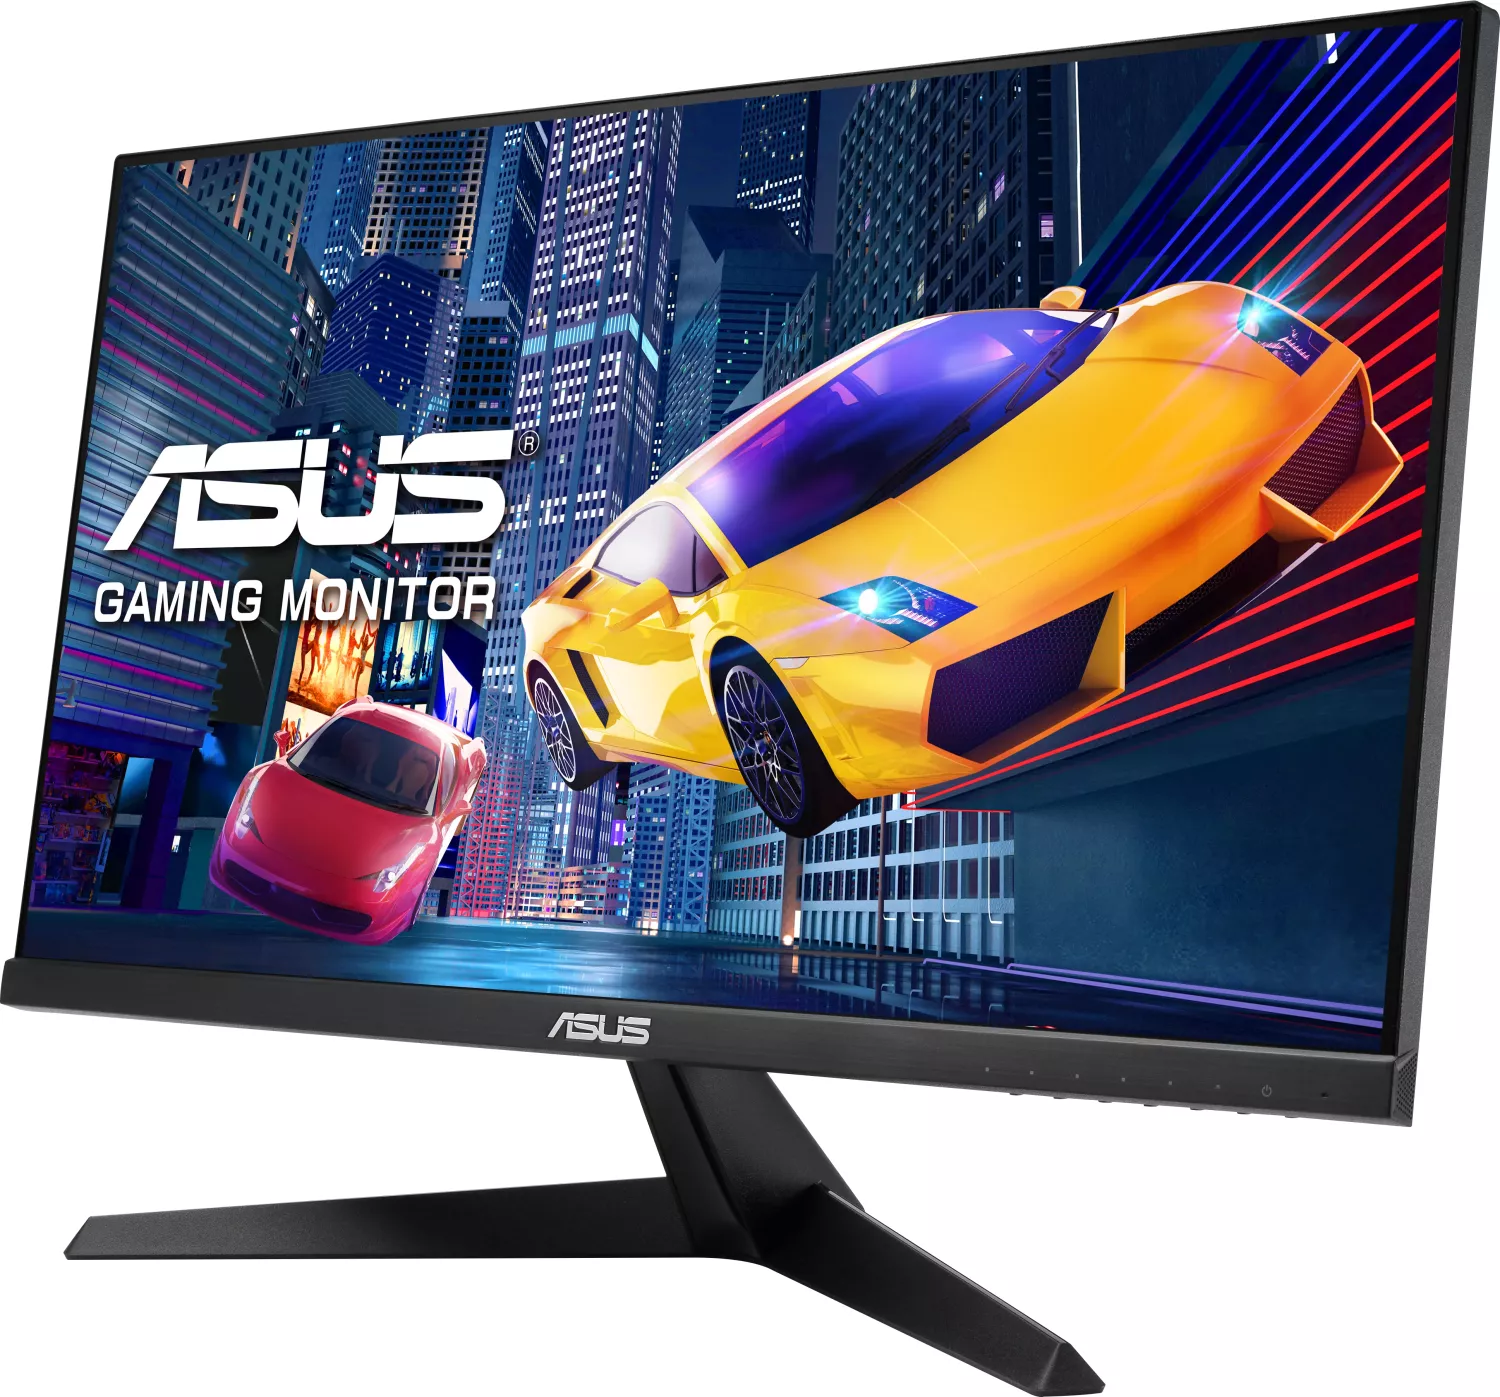 ASUS VY249HGE 61,00cm (24"), FHD LED-Monitor (1920 x 1080) / 16:9 / 144 Hz / HDMI / IPS Panel [Energieklasse D] (90LM06A5-B02370)